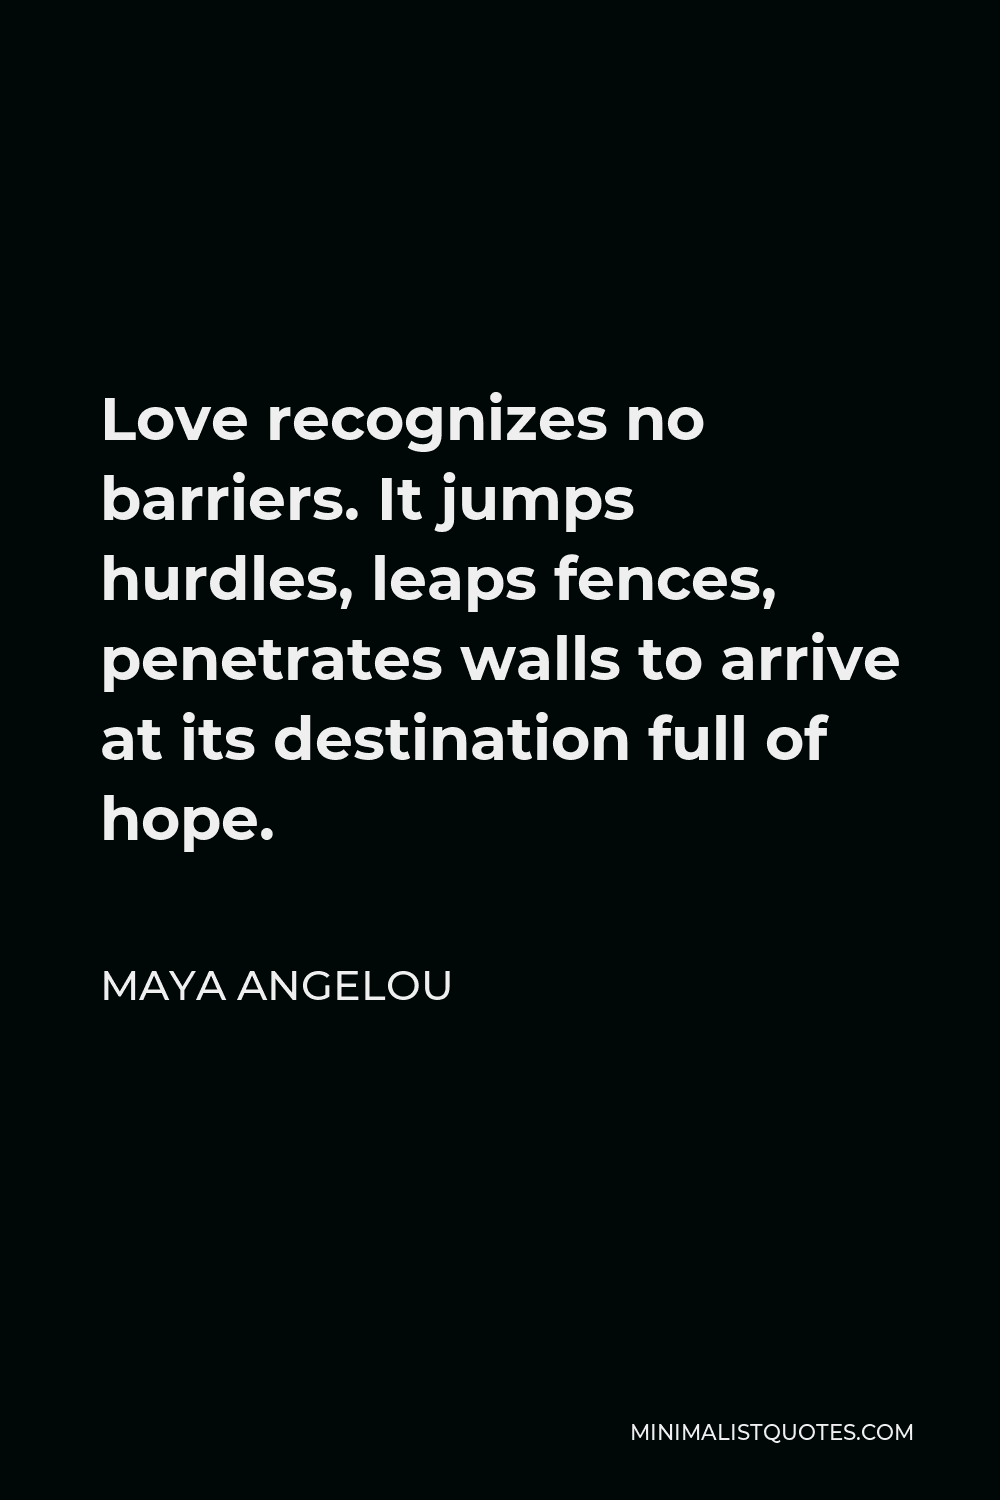 Maya Angelou Quote - Love recognizes no barriers. It jumps hurdles, leaps fences, penetrates walls to arrive at its destination full of hope.